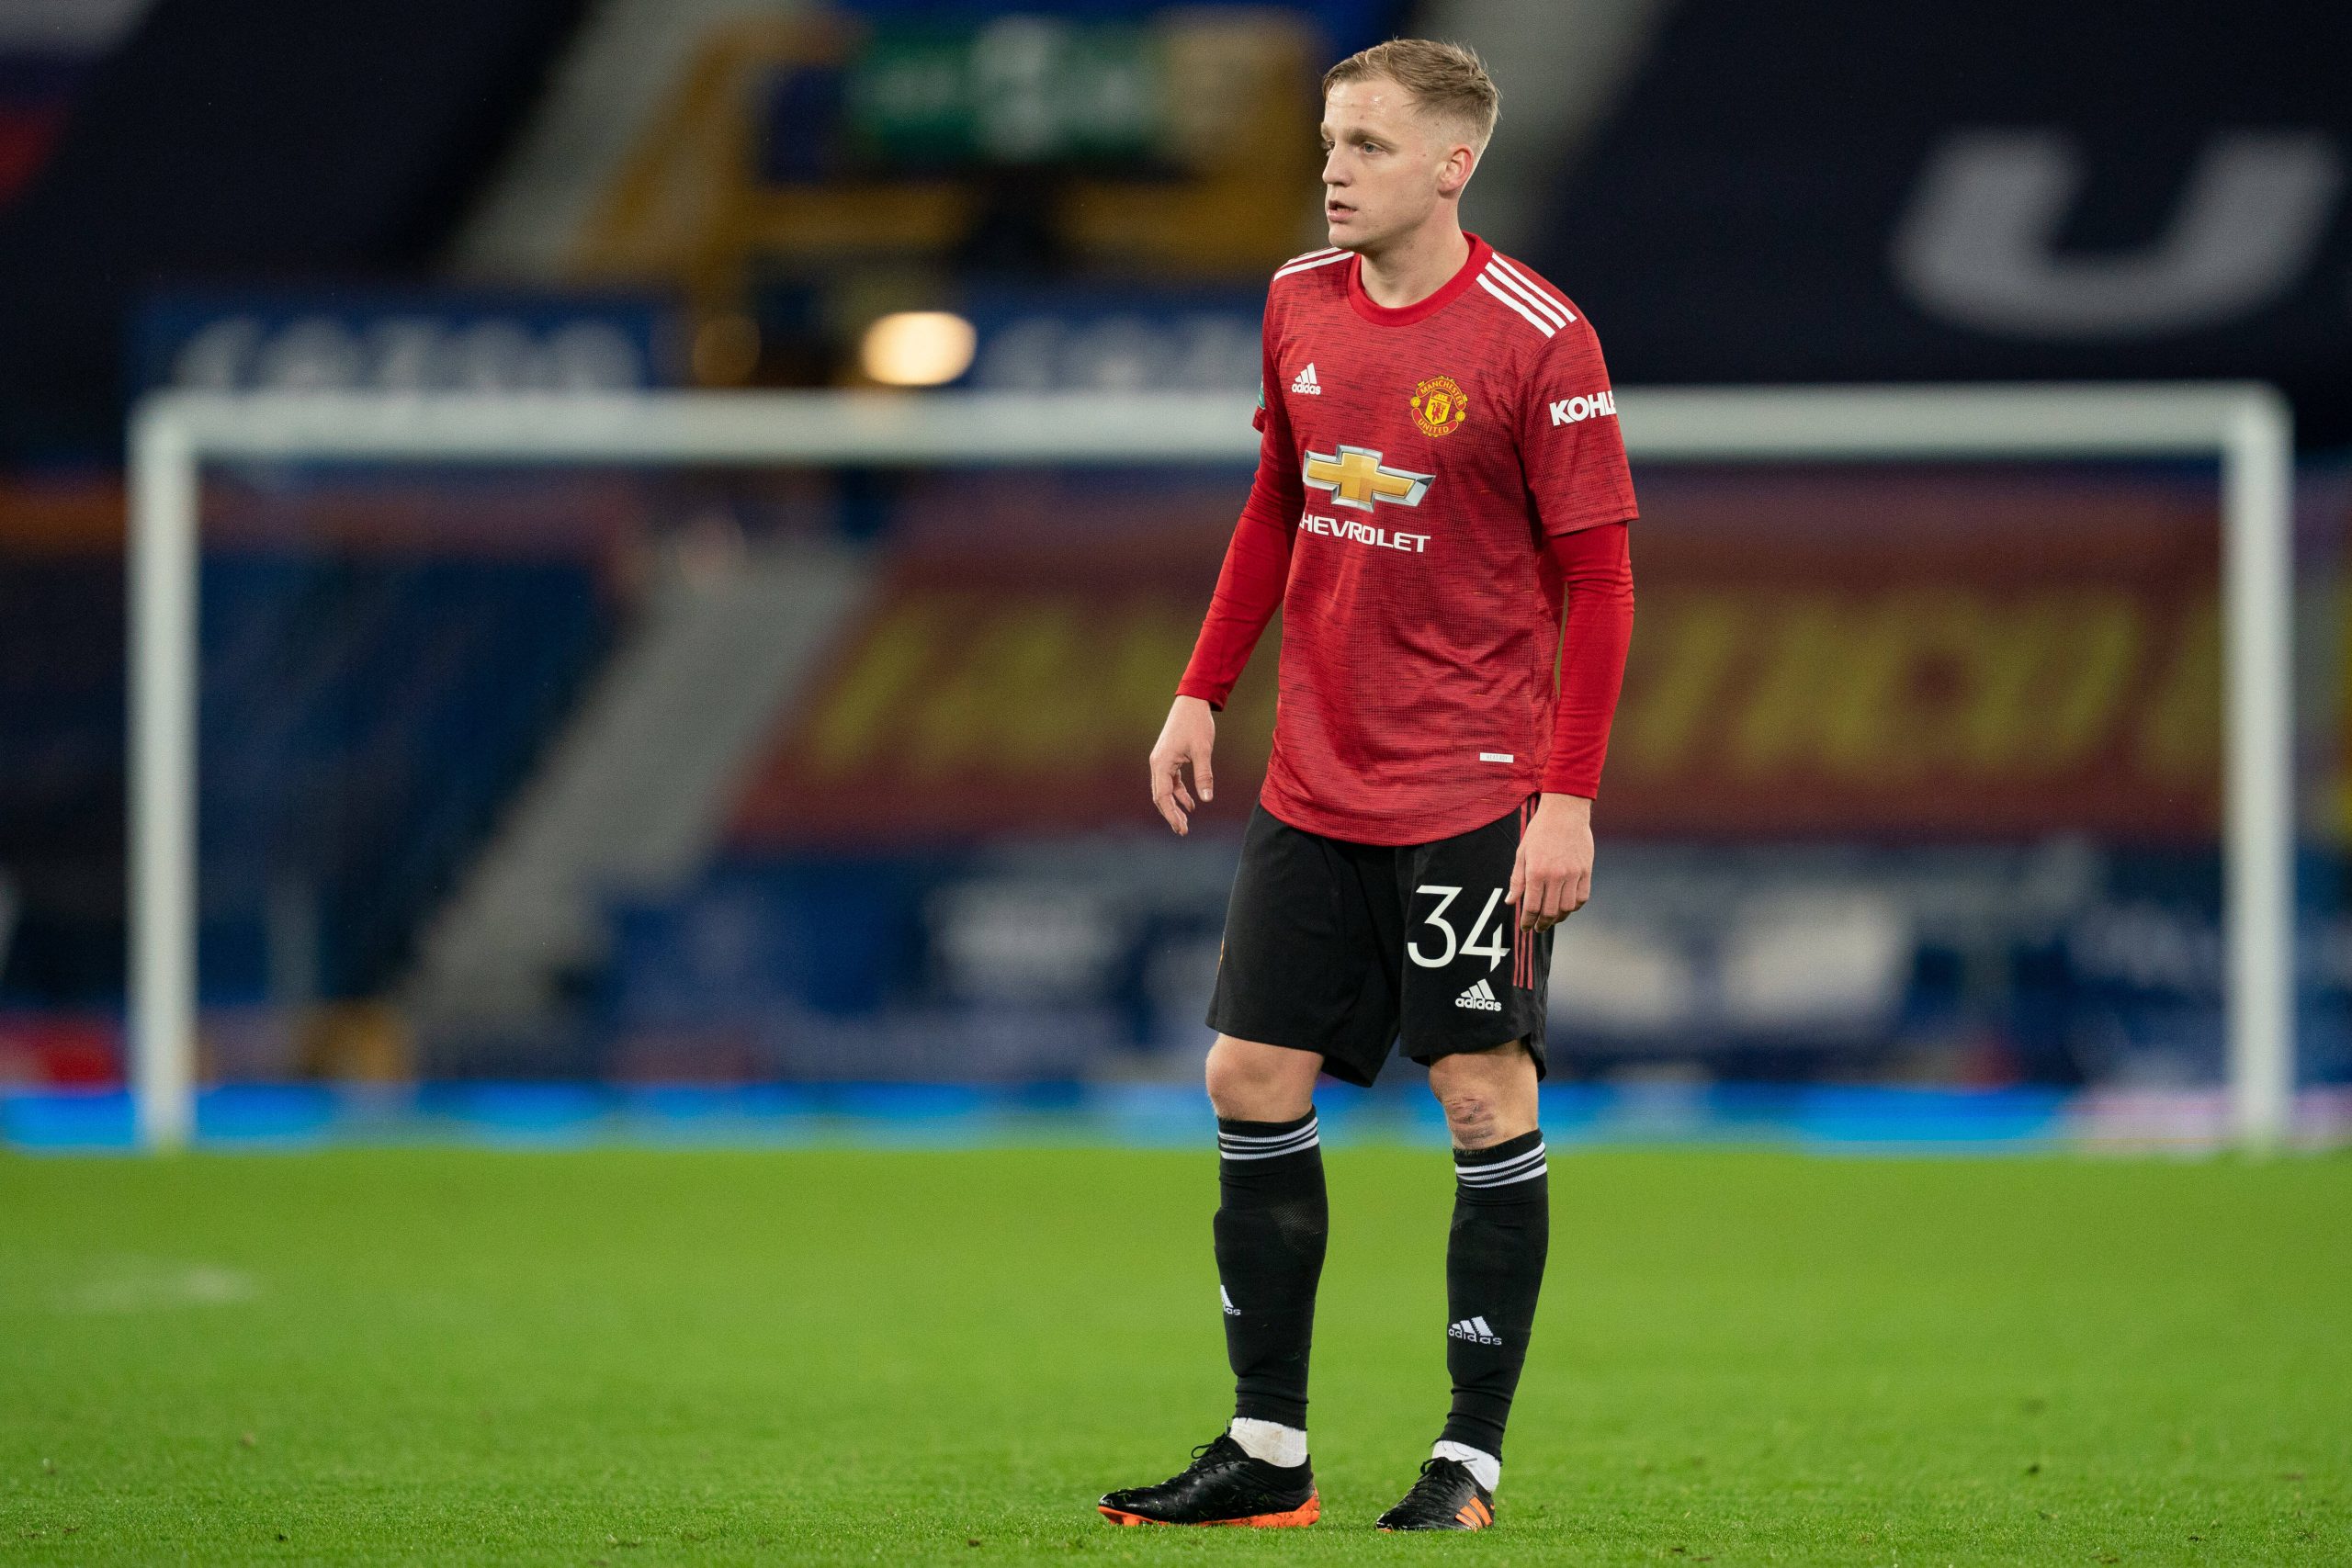 Arsenal could make a transfer move for Manchester United ace, Donny van de Beek in January.